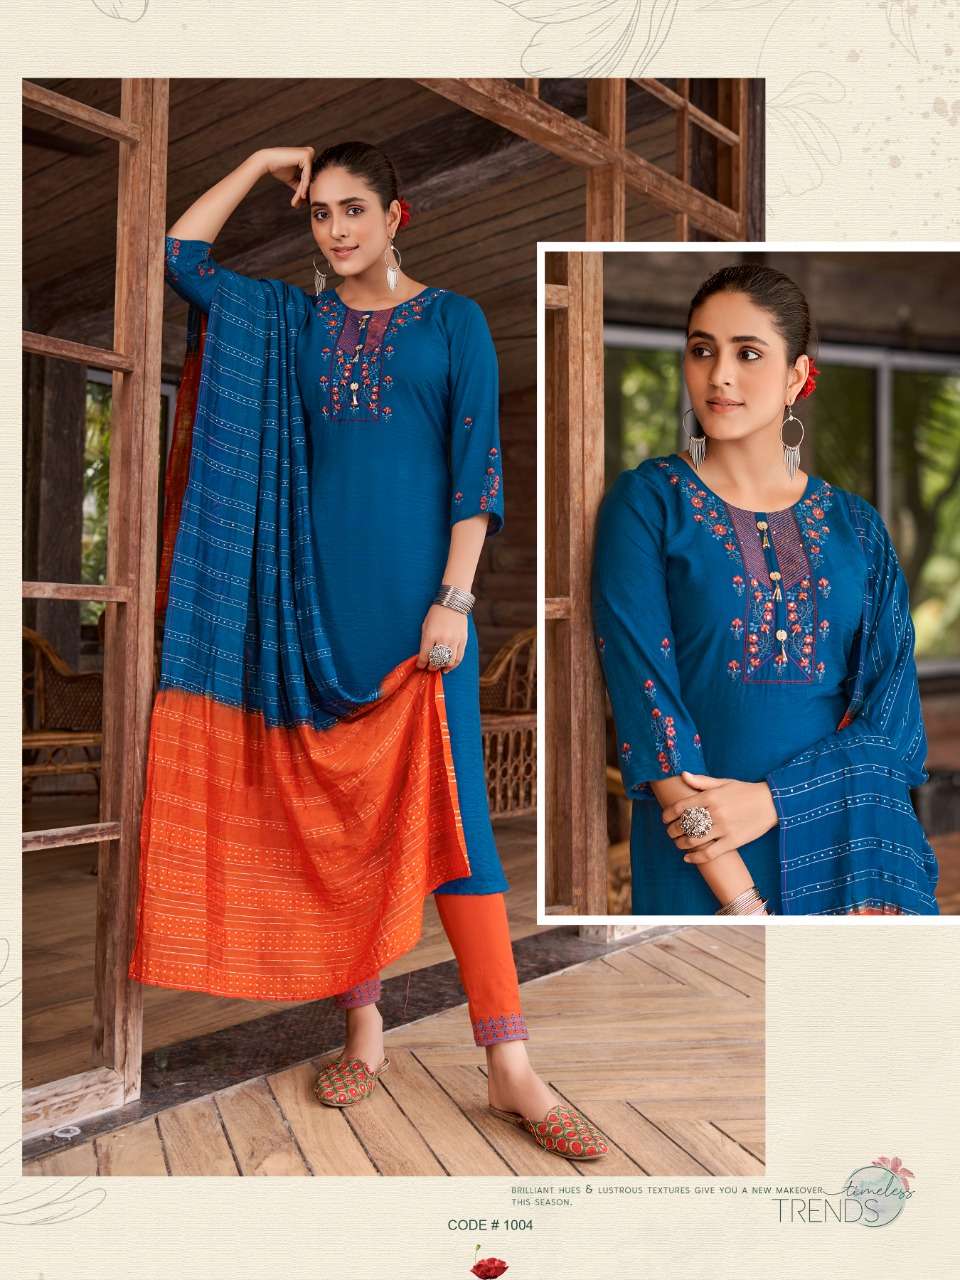 MANOHARI VOL-1 BY COLOURPIX 1001 TO 1006 SERIES BEAUTIFUL SUITS COLORFUL STYLISH FANCY CASUAL WEAR & ETHNIC WEAR VISCOSE DRESSES AT WHOLESALE PRICE